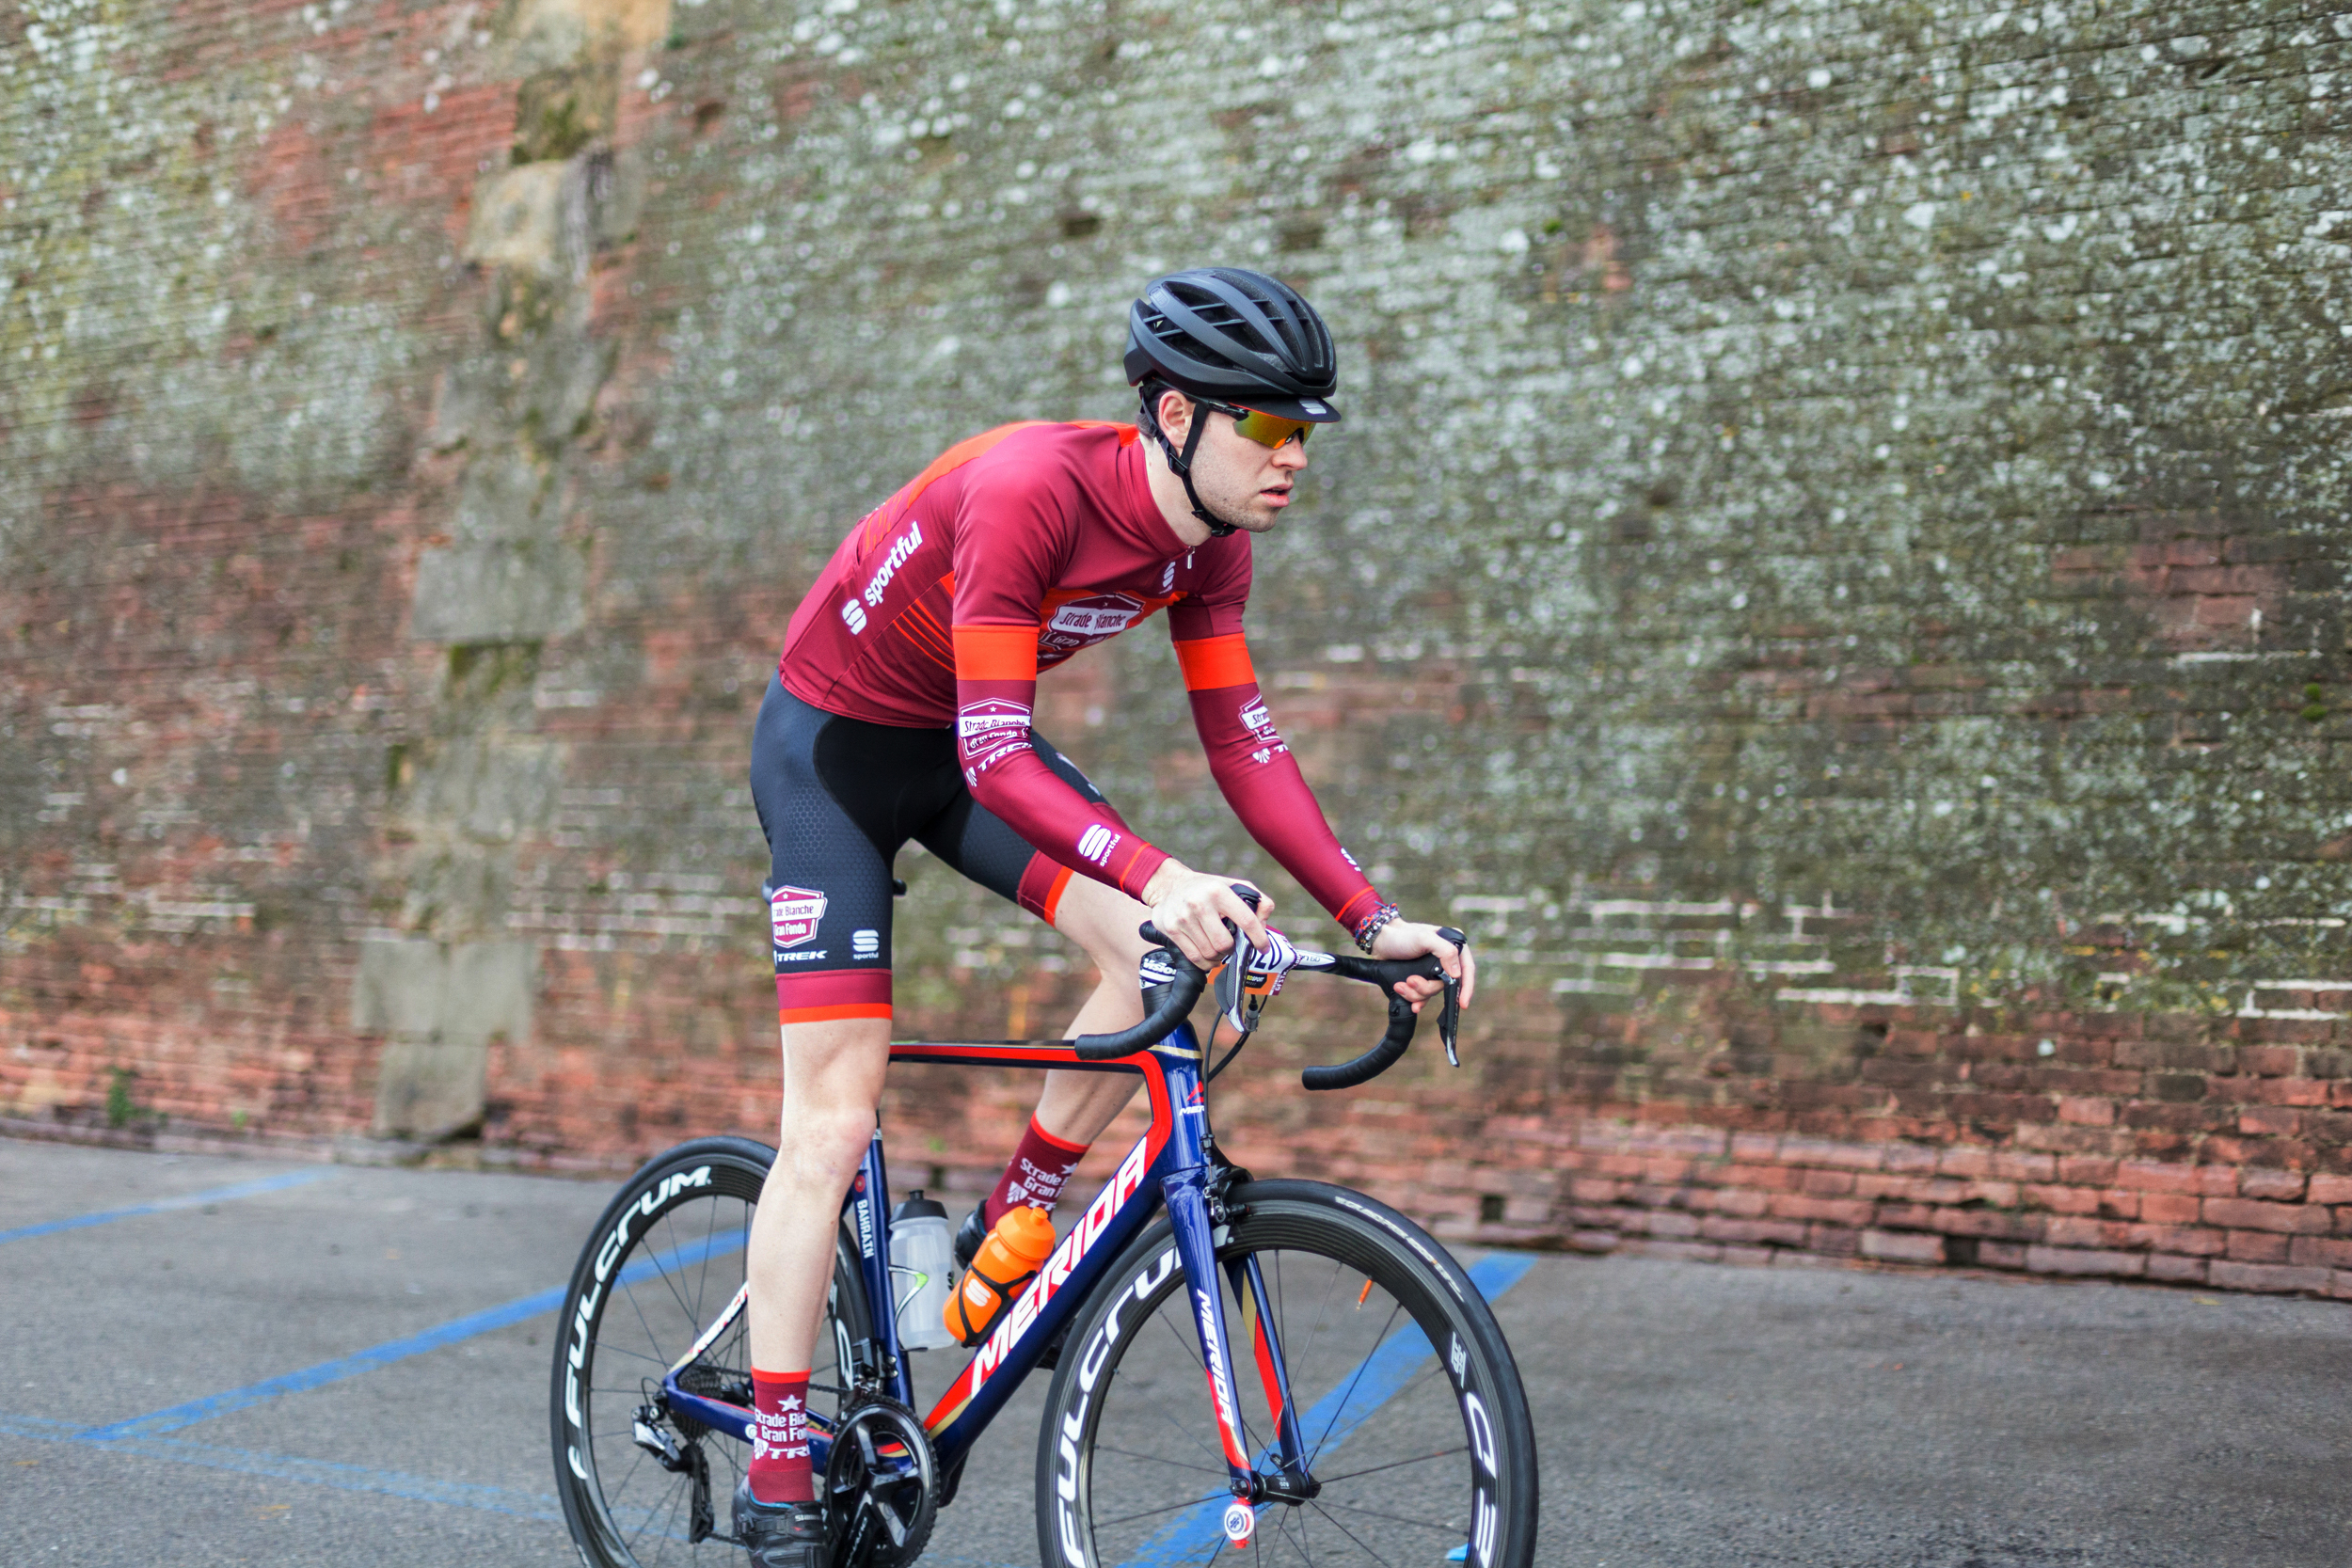 A cyclist riding in the bodyfit pro classics jersey from sportful.